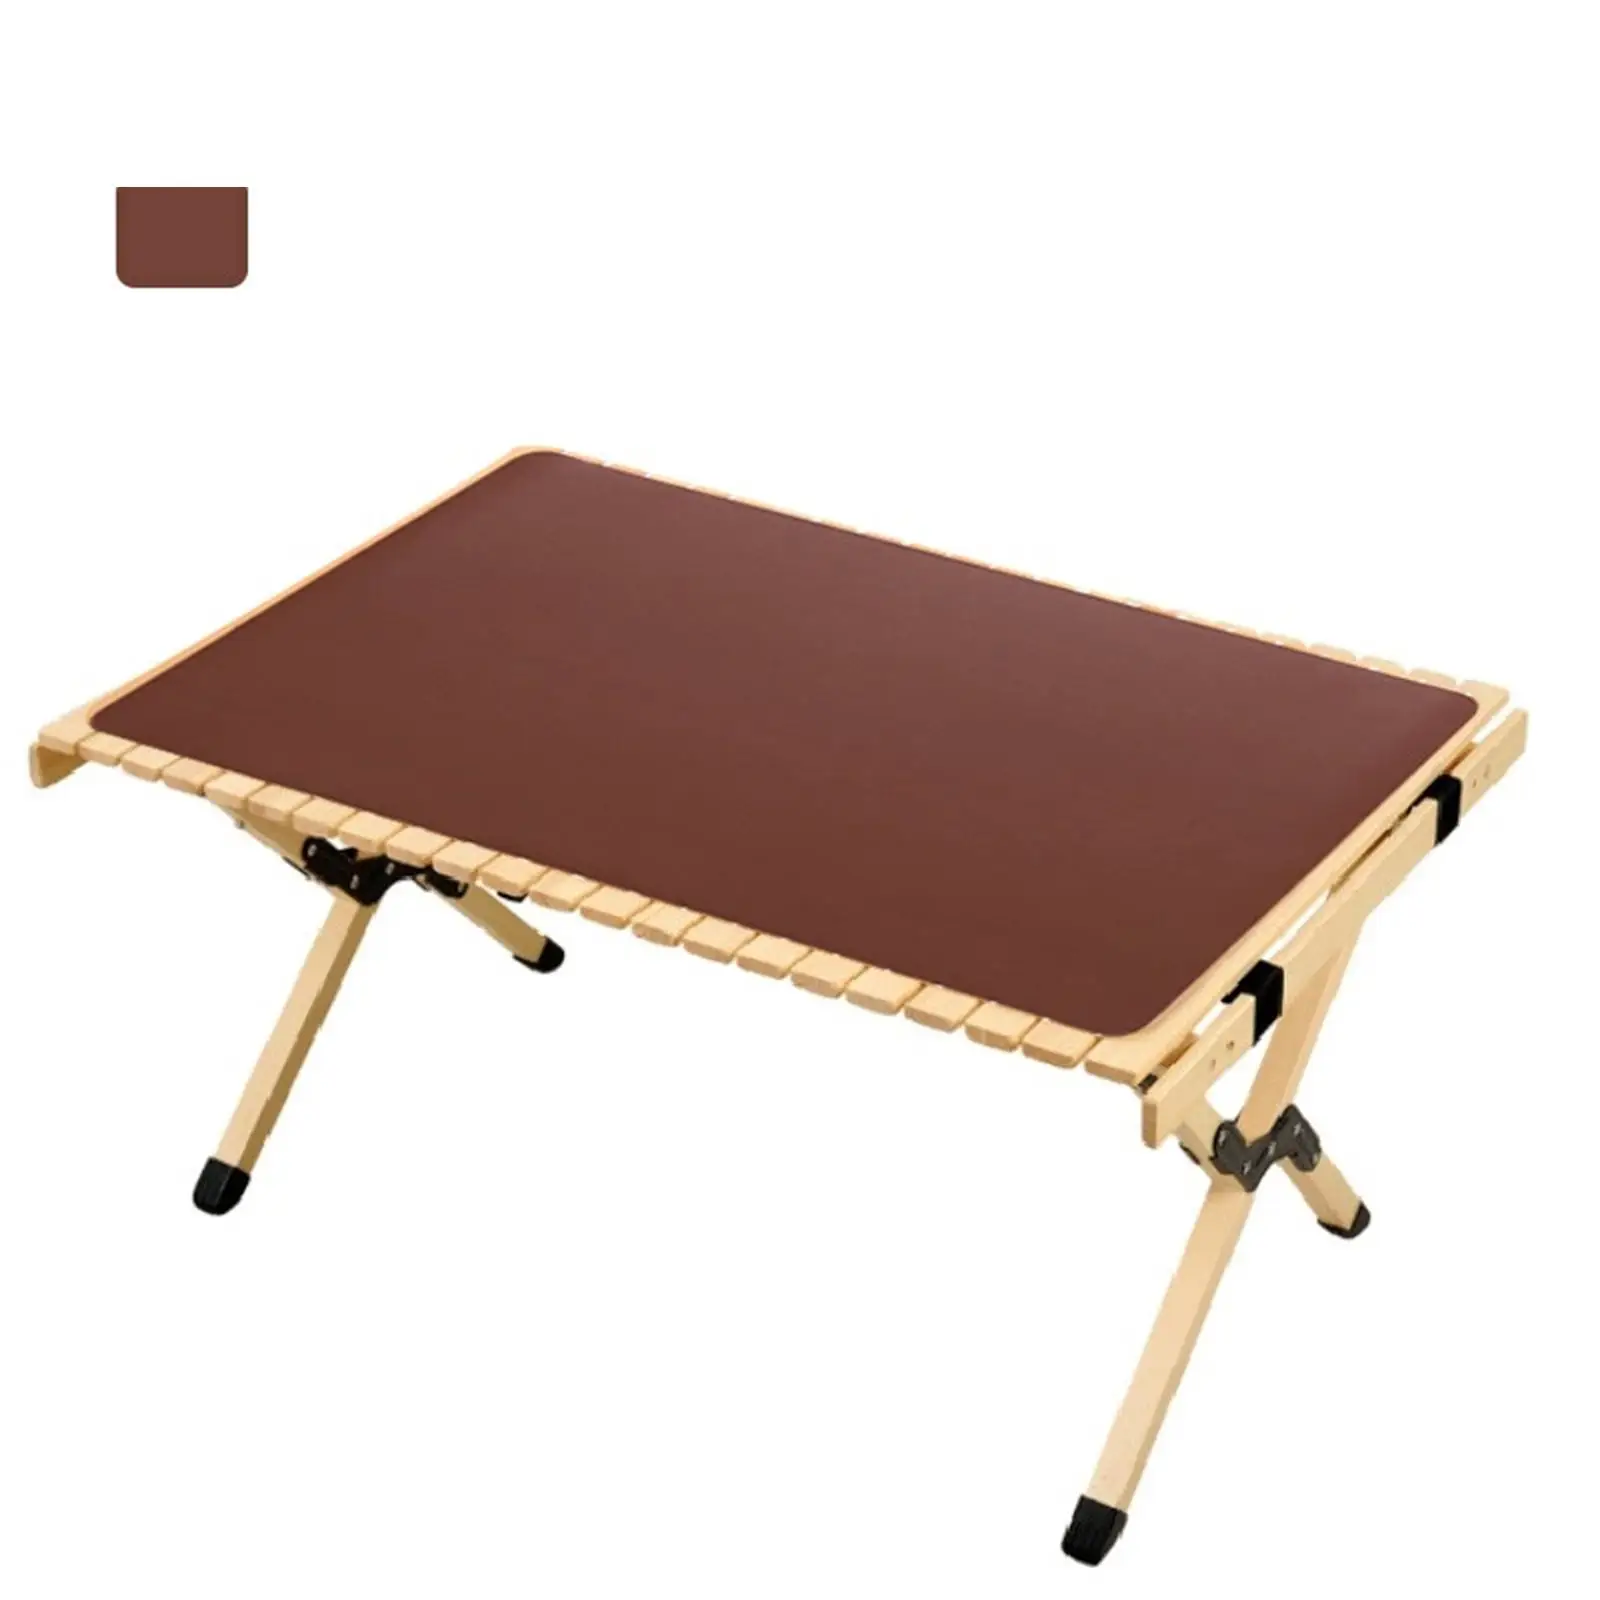 Folding Placemat Household Heat Insulation Oil Proof Home Decoration PU desk for Table BBQ Office Mountaineering Backpacking